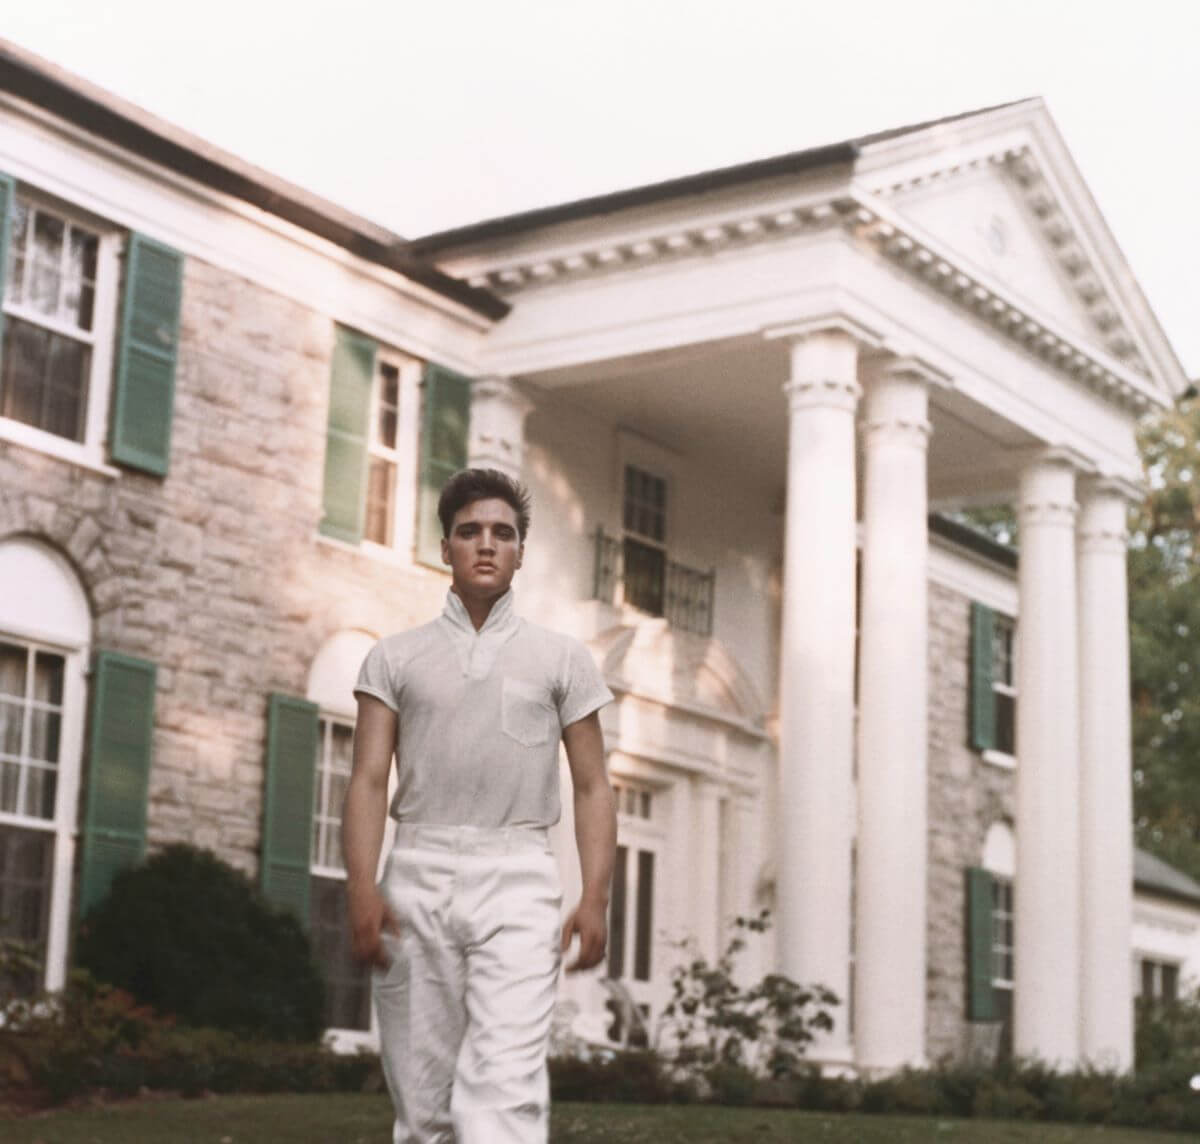 Elvis wears white pants and a white shirt and walks in front of Graceland.